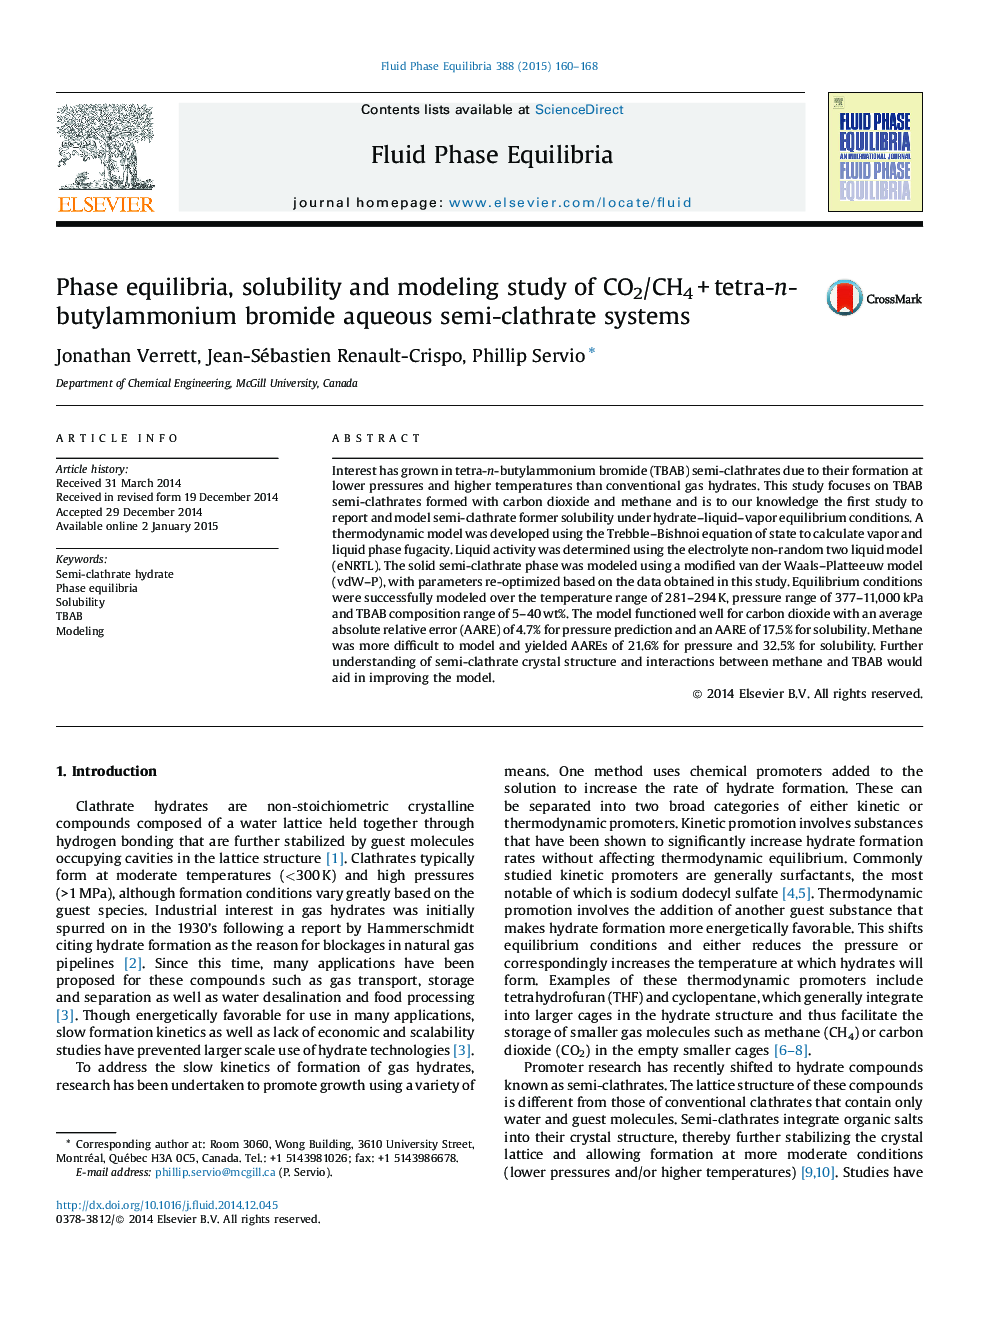 Phase equilibria, solubility and modeling study of CO2/CH4 + tetra-n-butylammonium bromide aqueous semi-clathrate systems